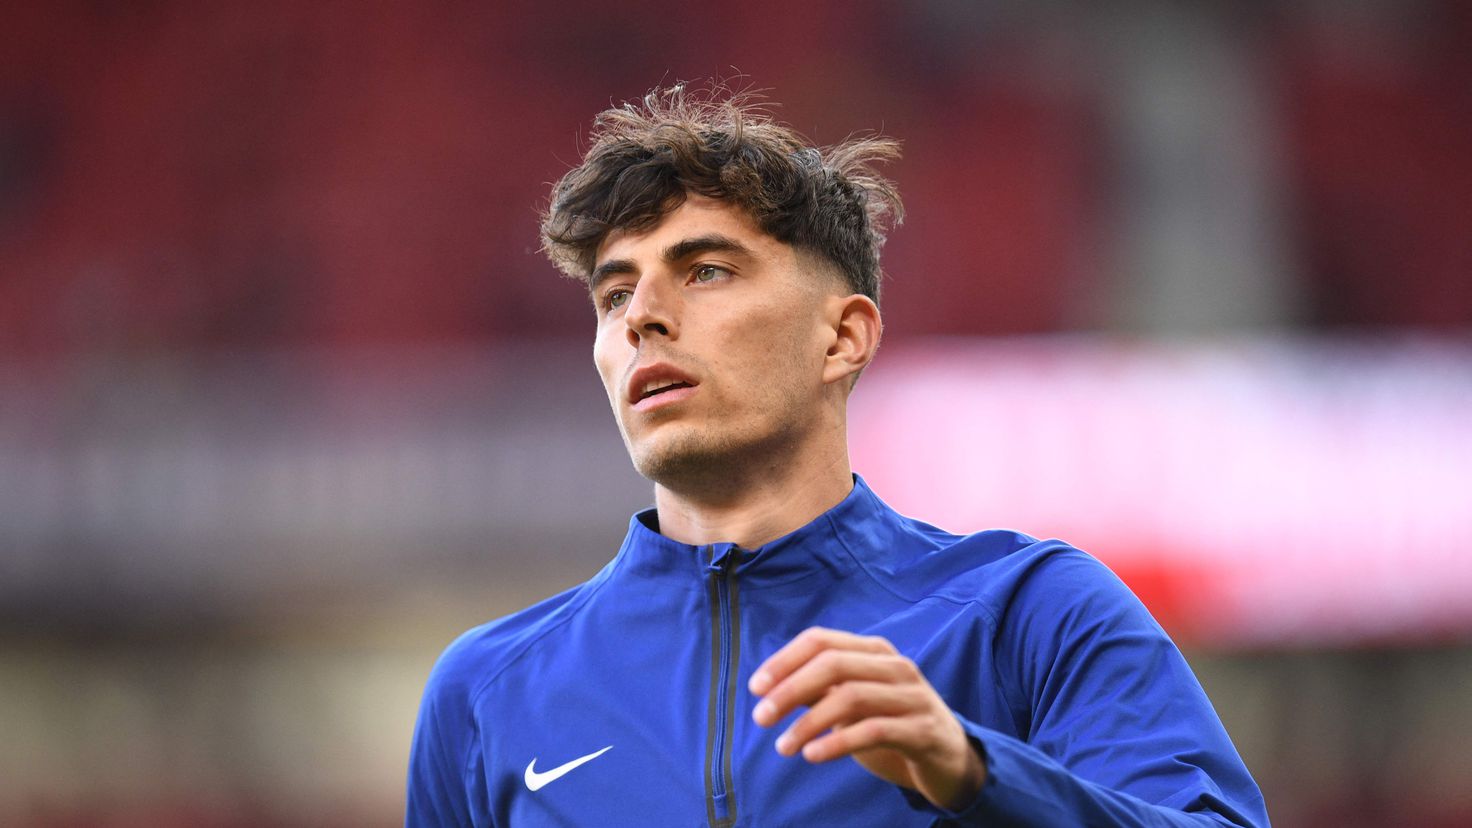 Bild: Madrid mega offer for Havertz and the signing will be imminent
